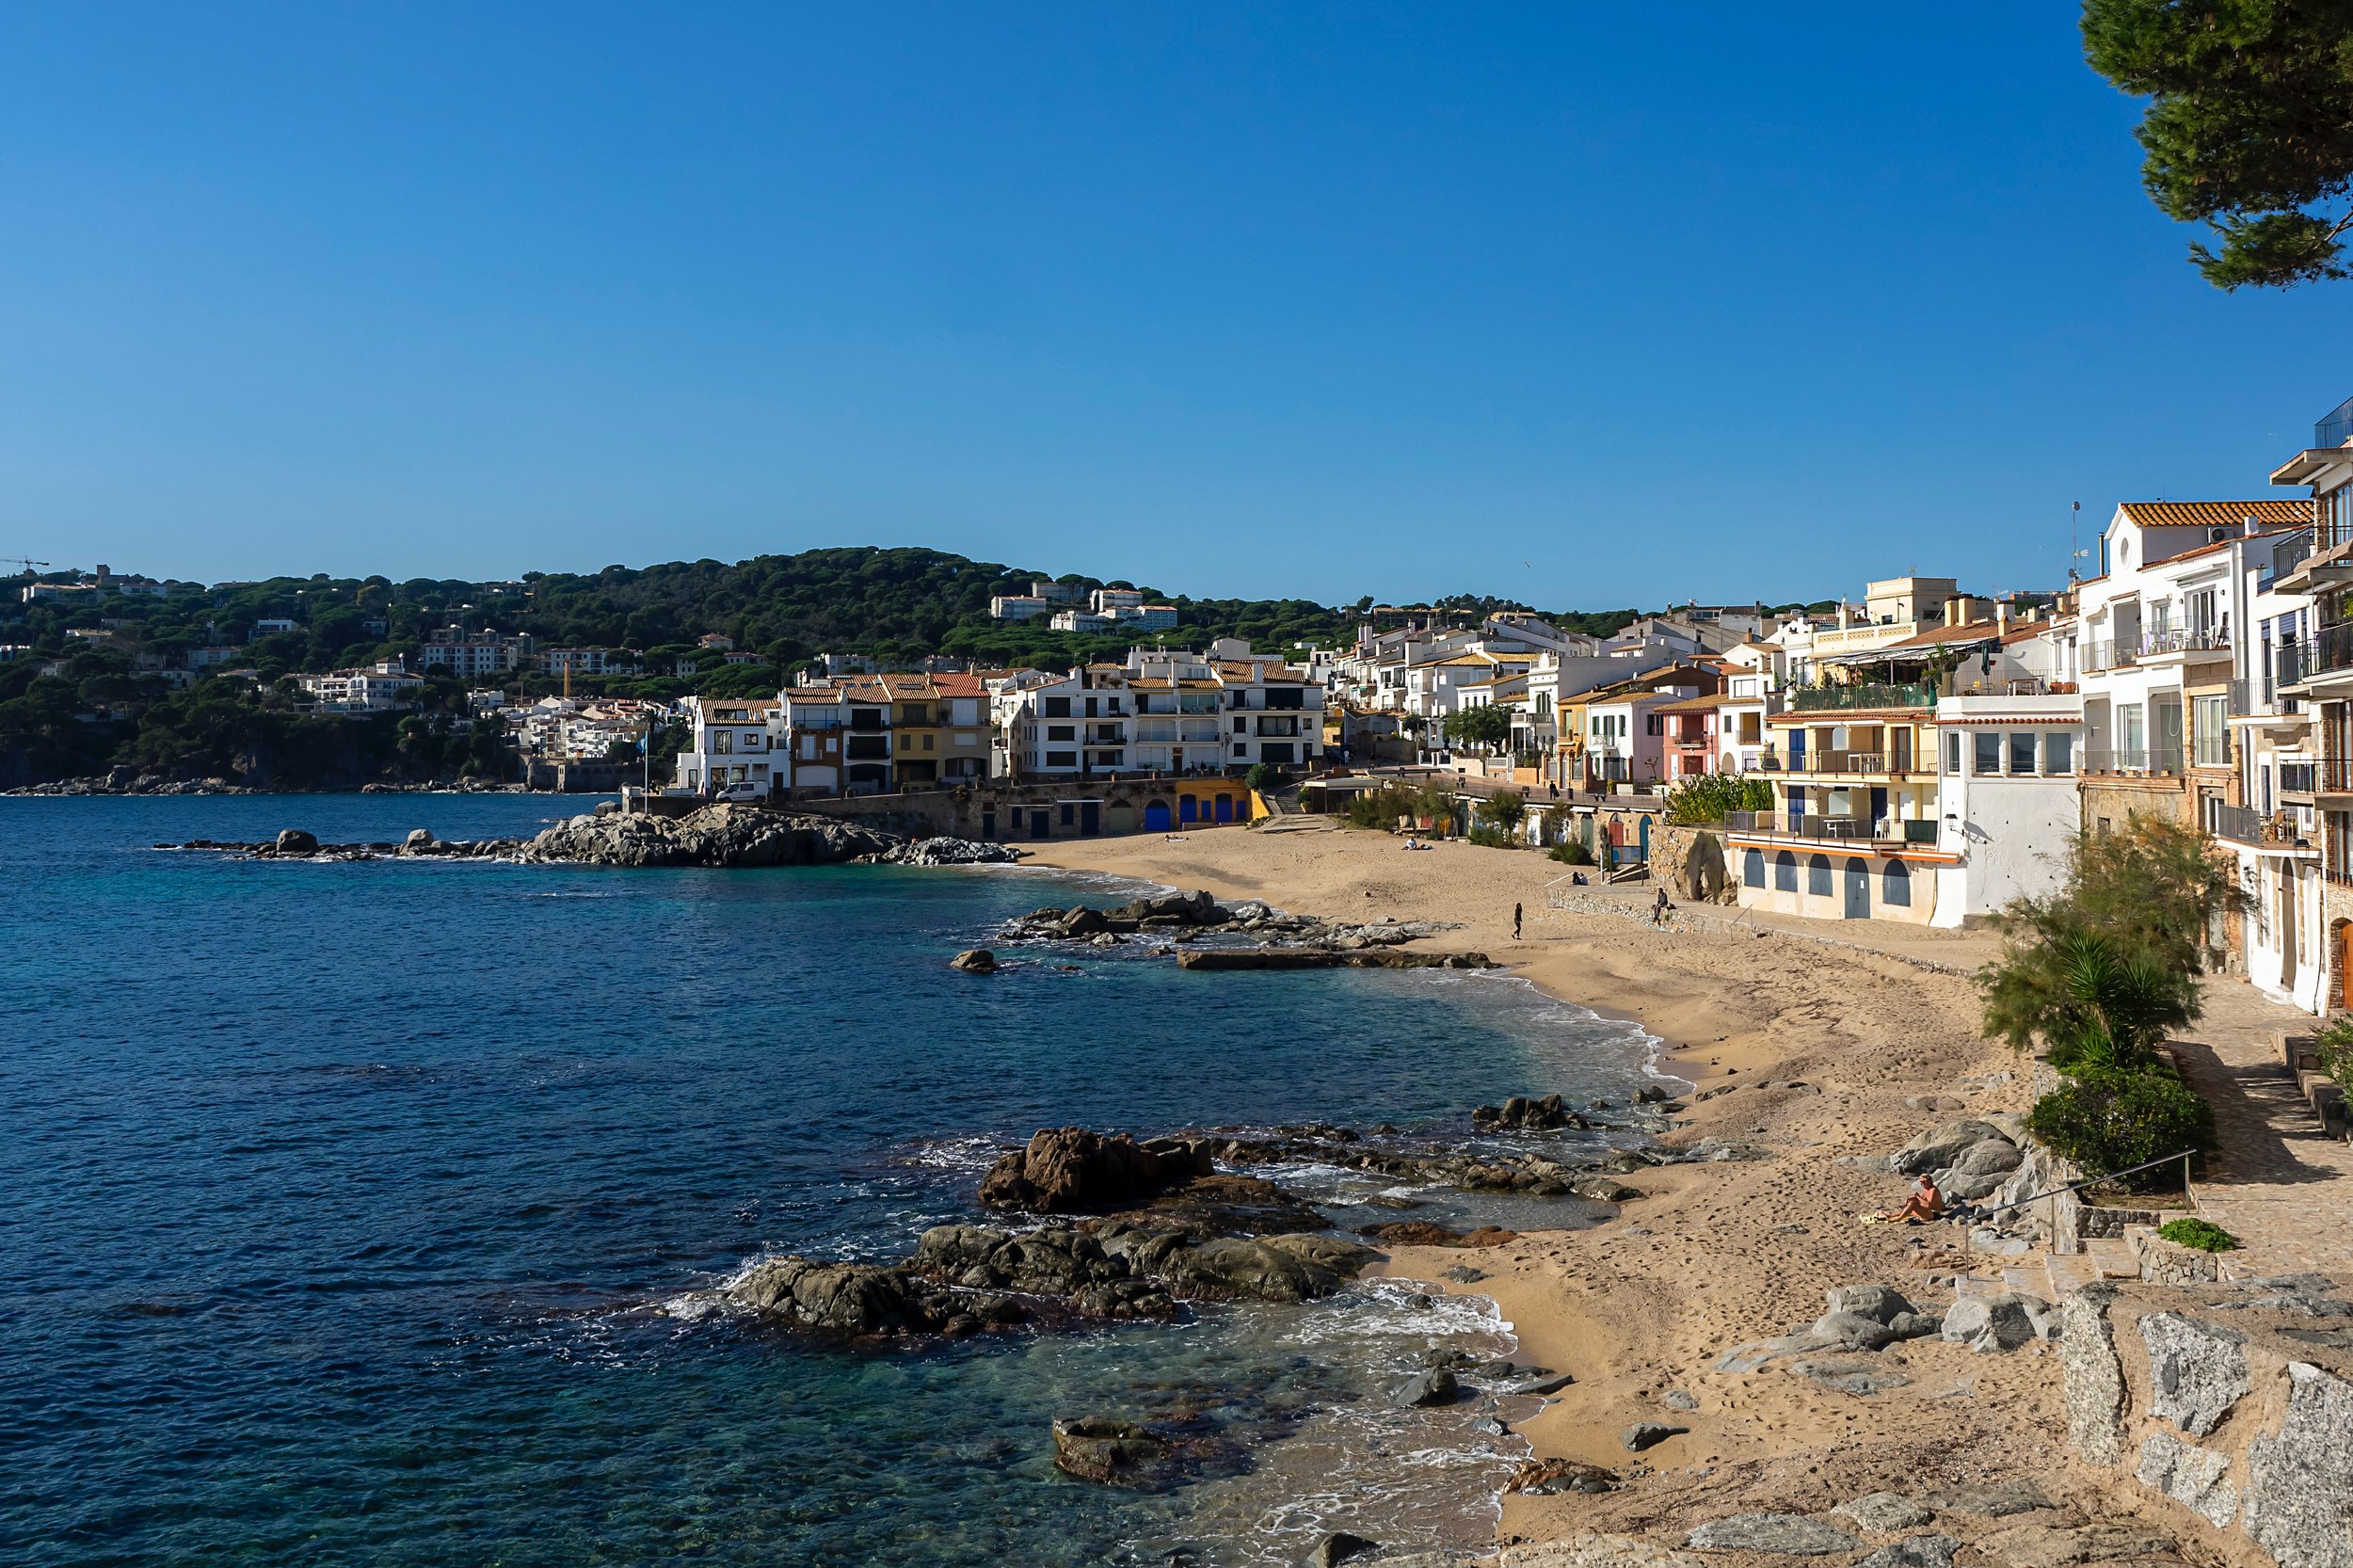 Hiking Day Tour Costa Brava, Spain with Lunch in a Fishing Village